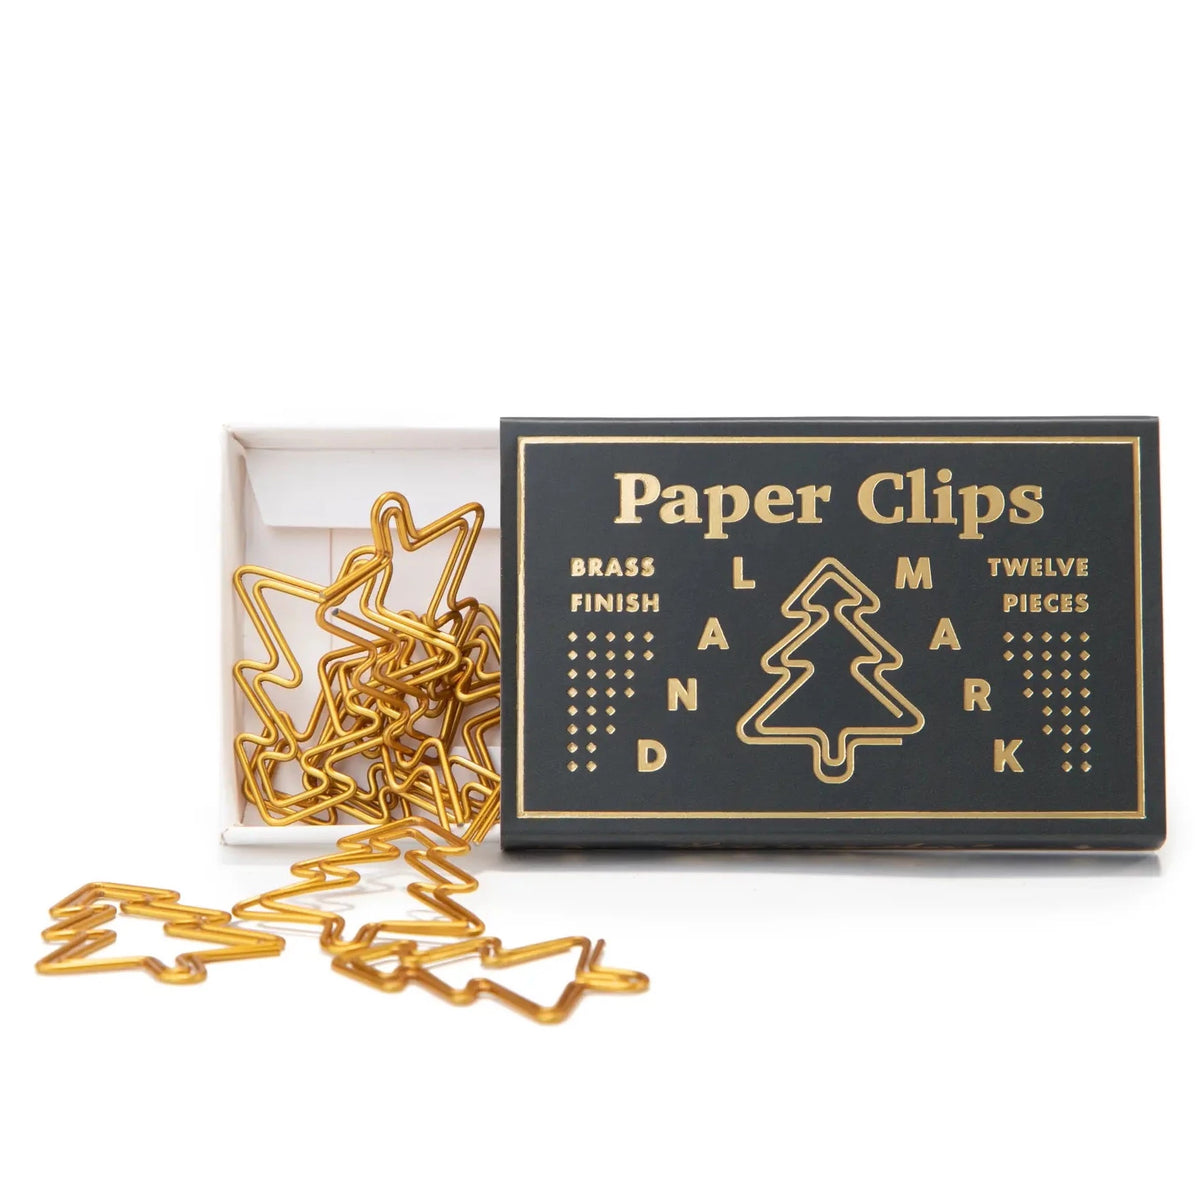 Pine Tree Paper Clips